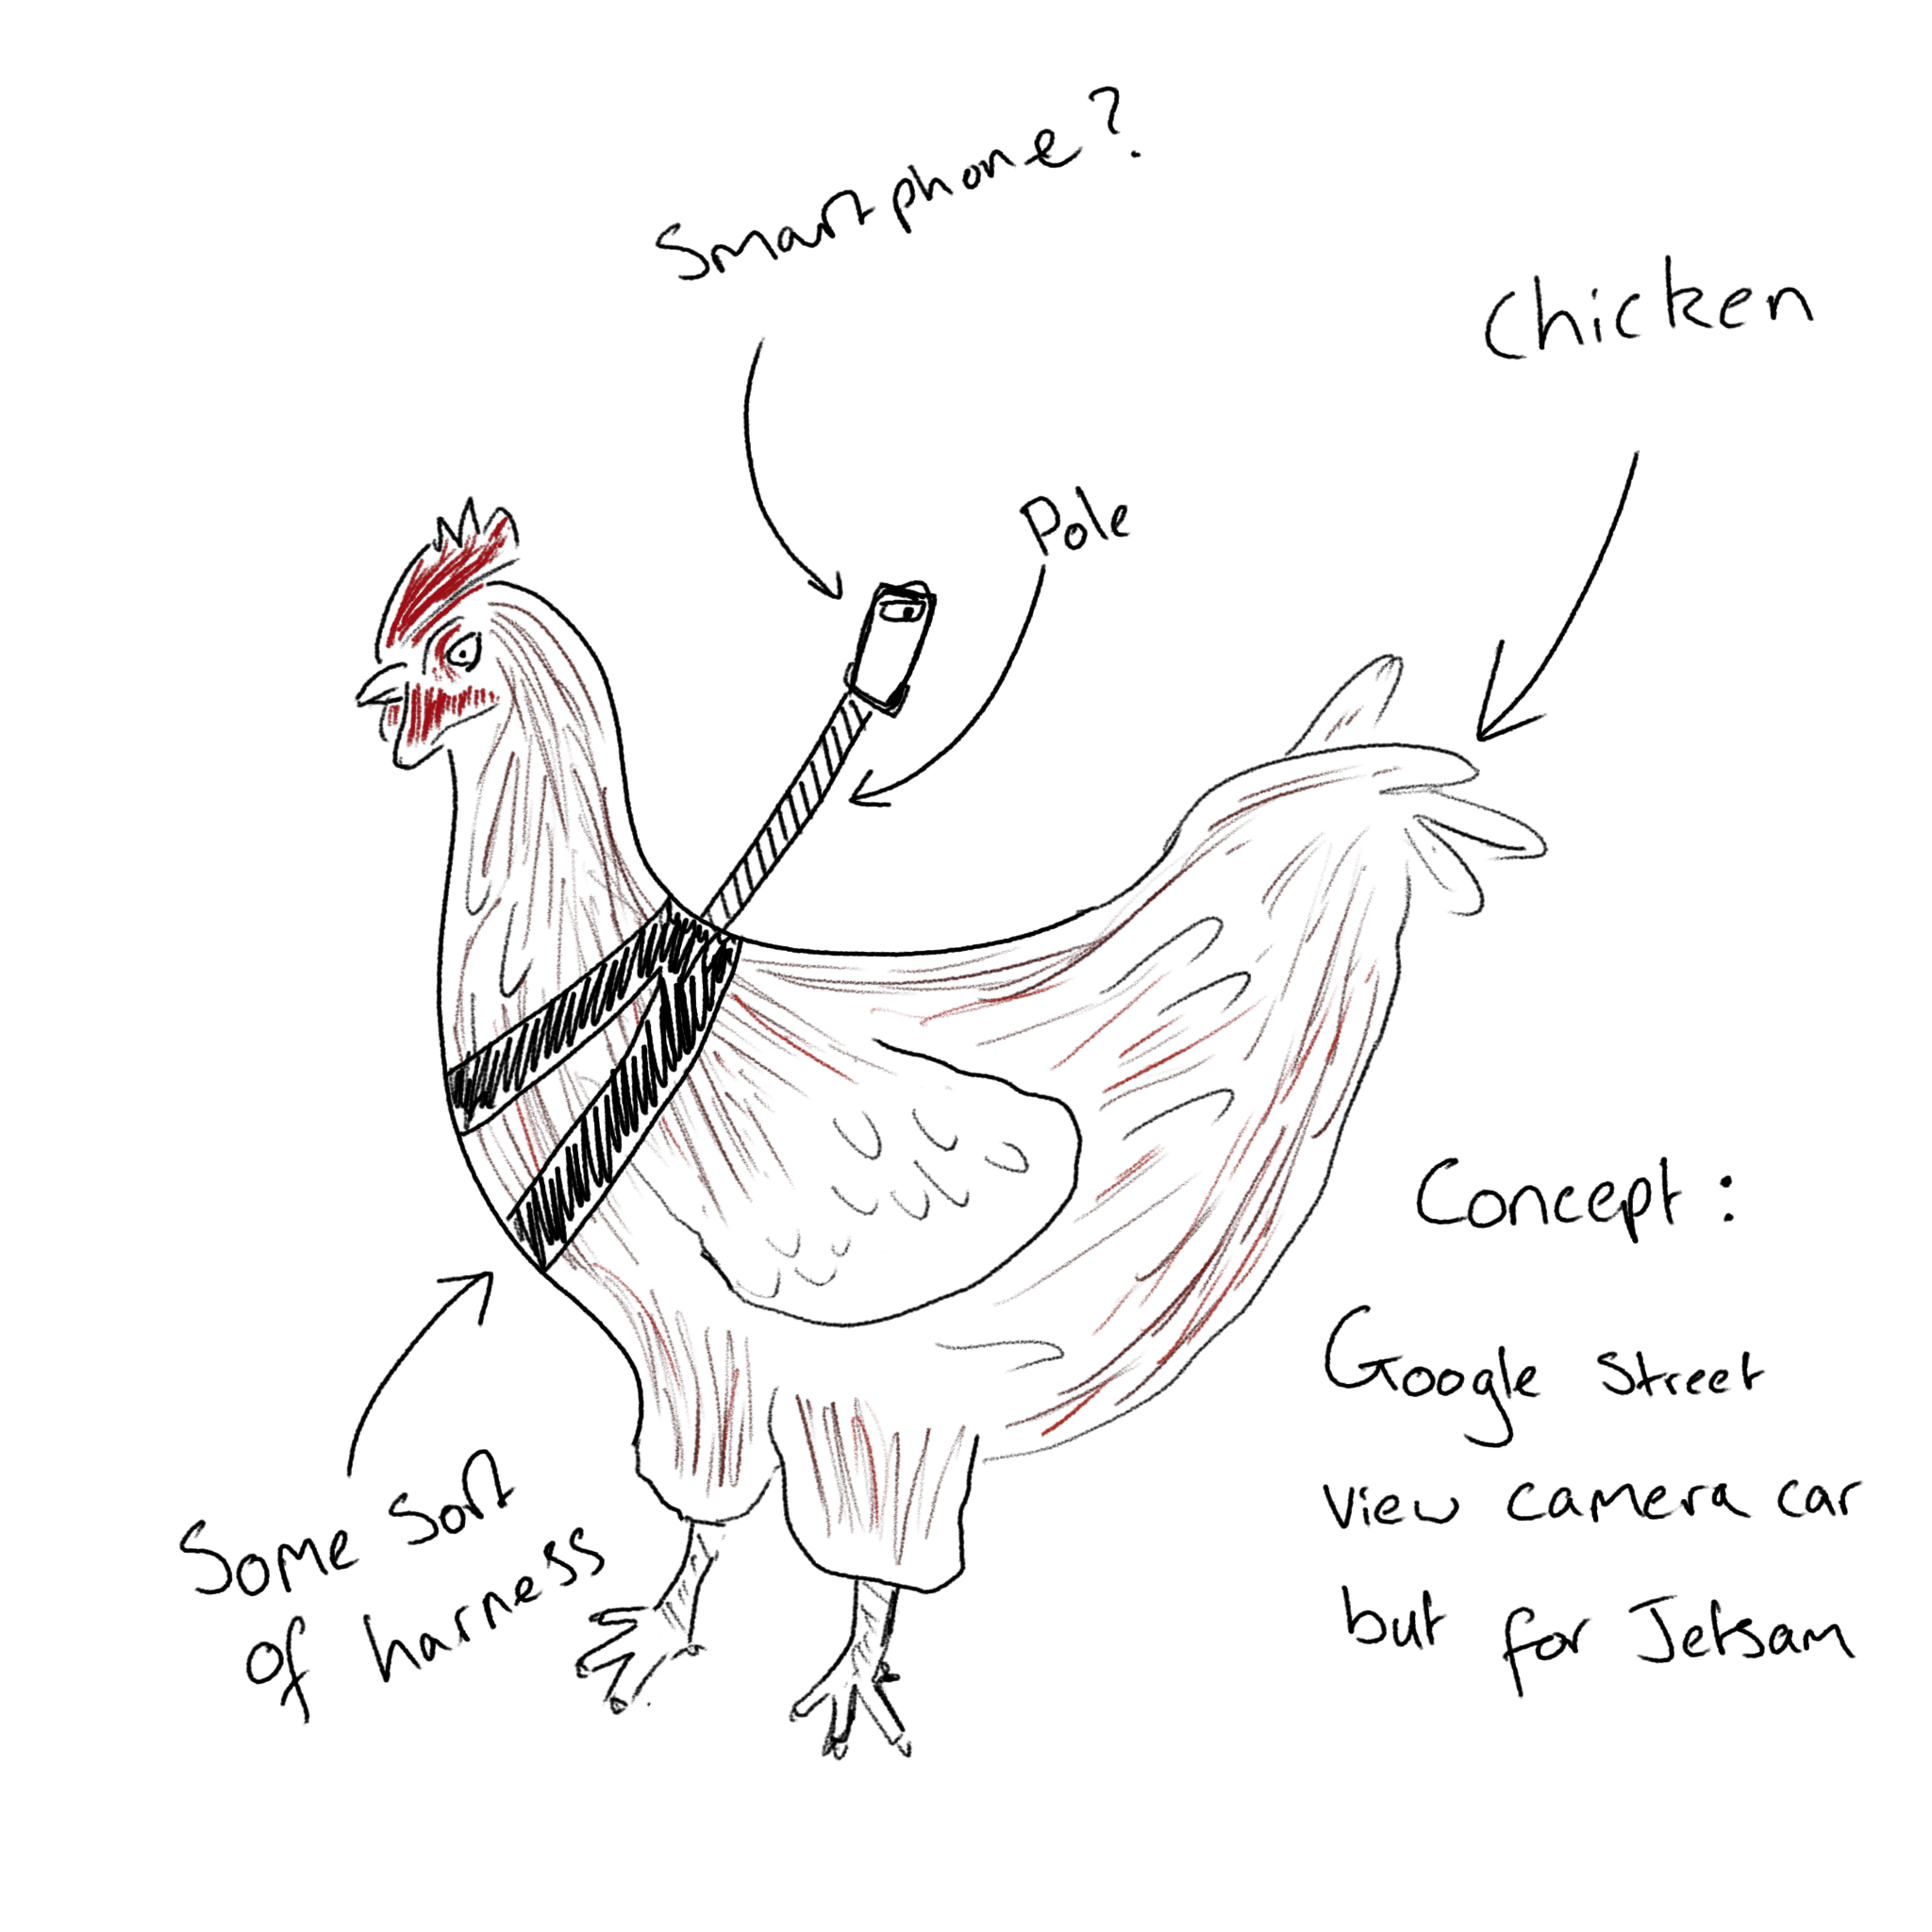 Idea 3, a chicken with a phone strapped to it